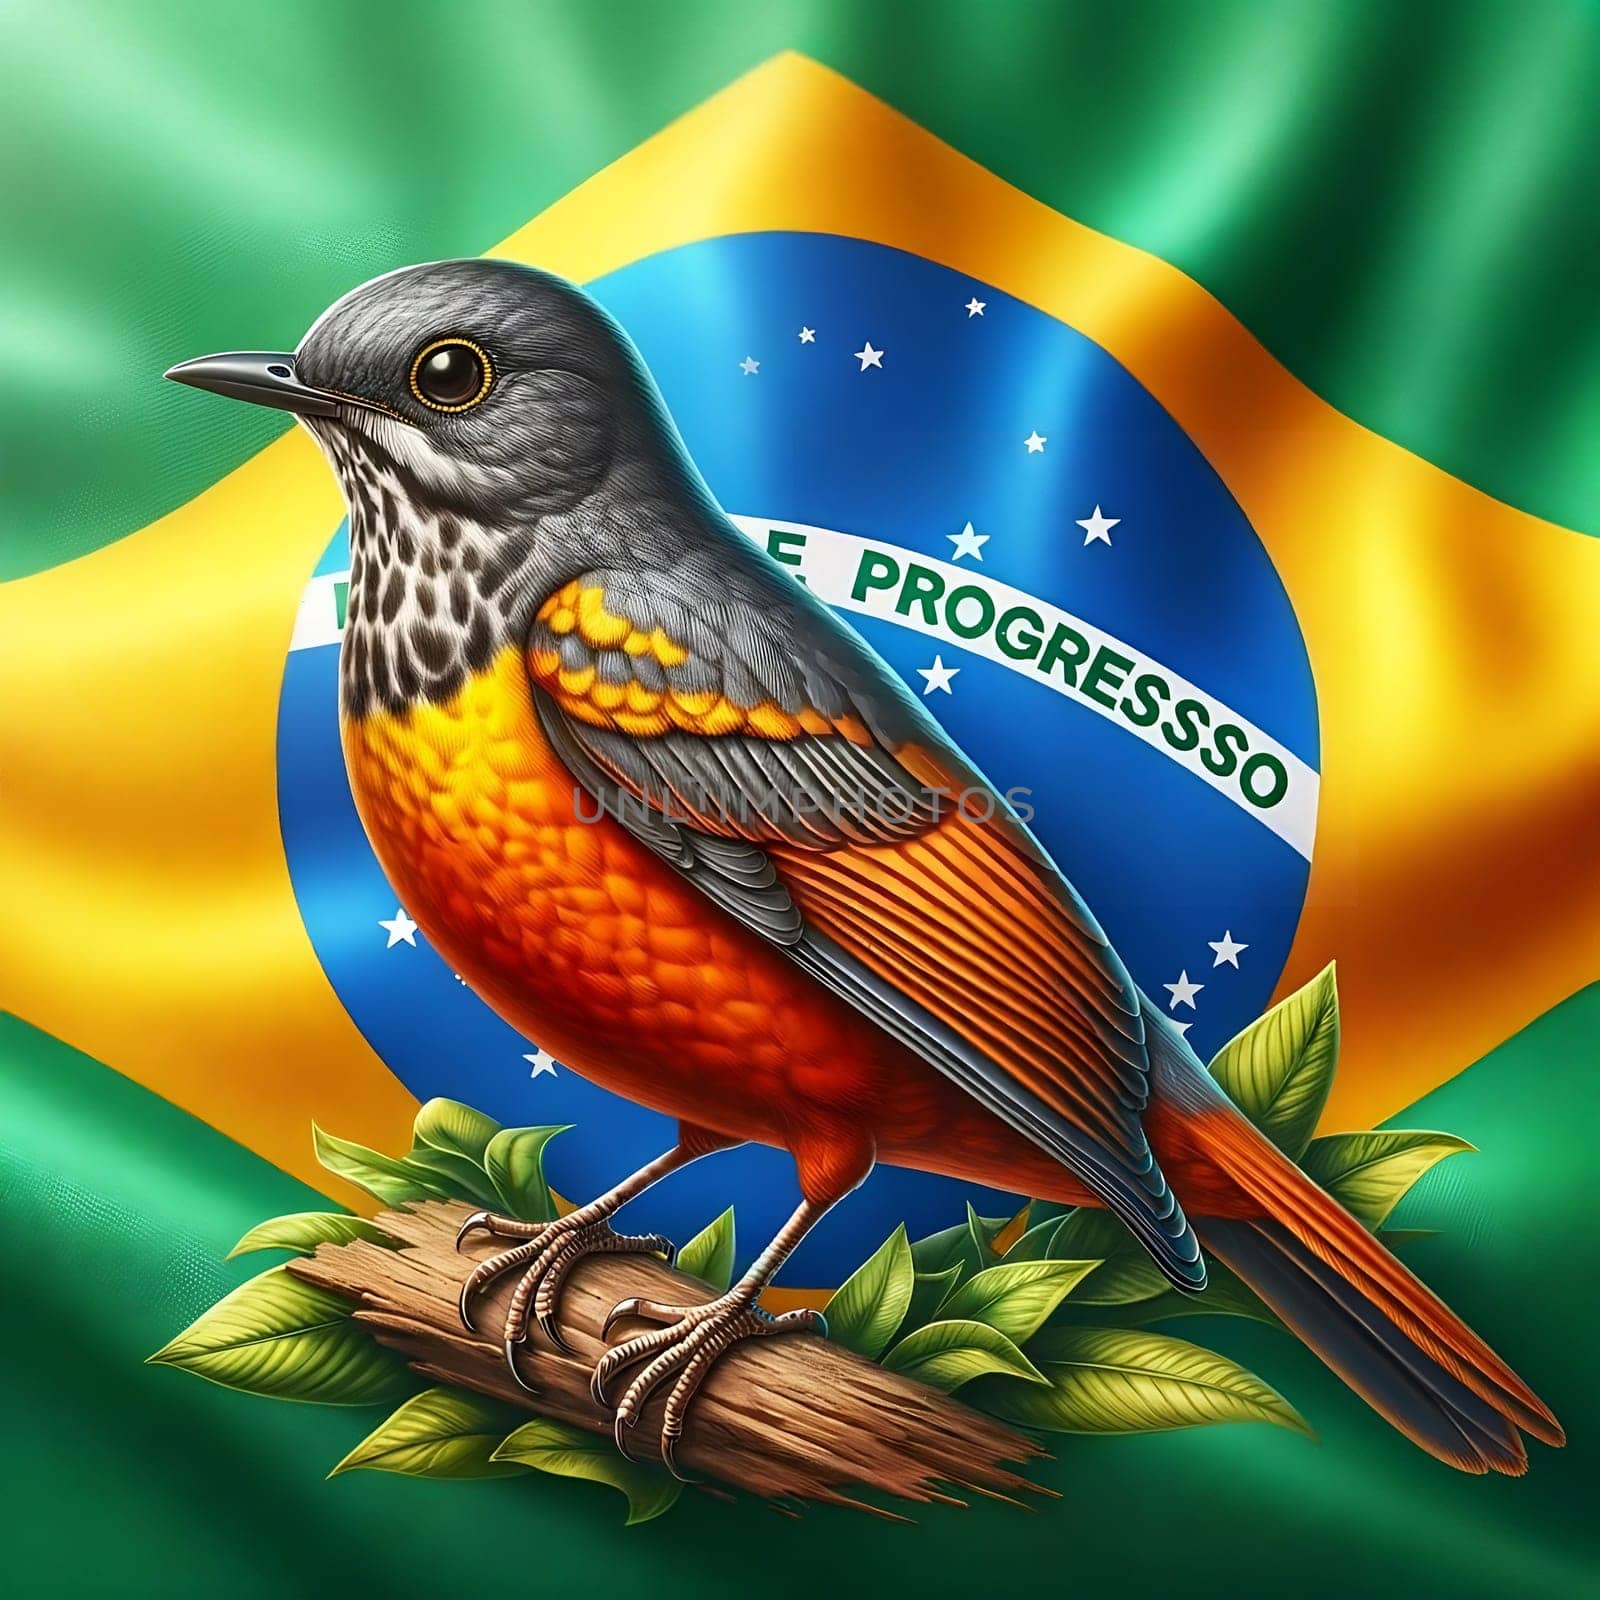 National Bird of Brazil, The rufous-bellied thrush, stands in front of a Brazilian flag by SweCreatives